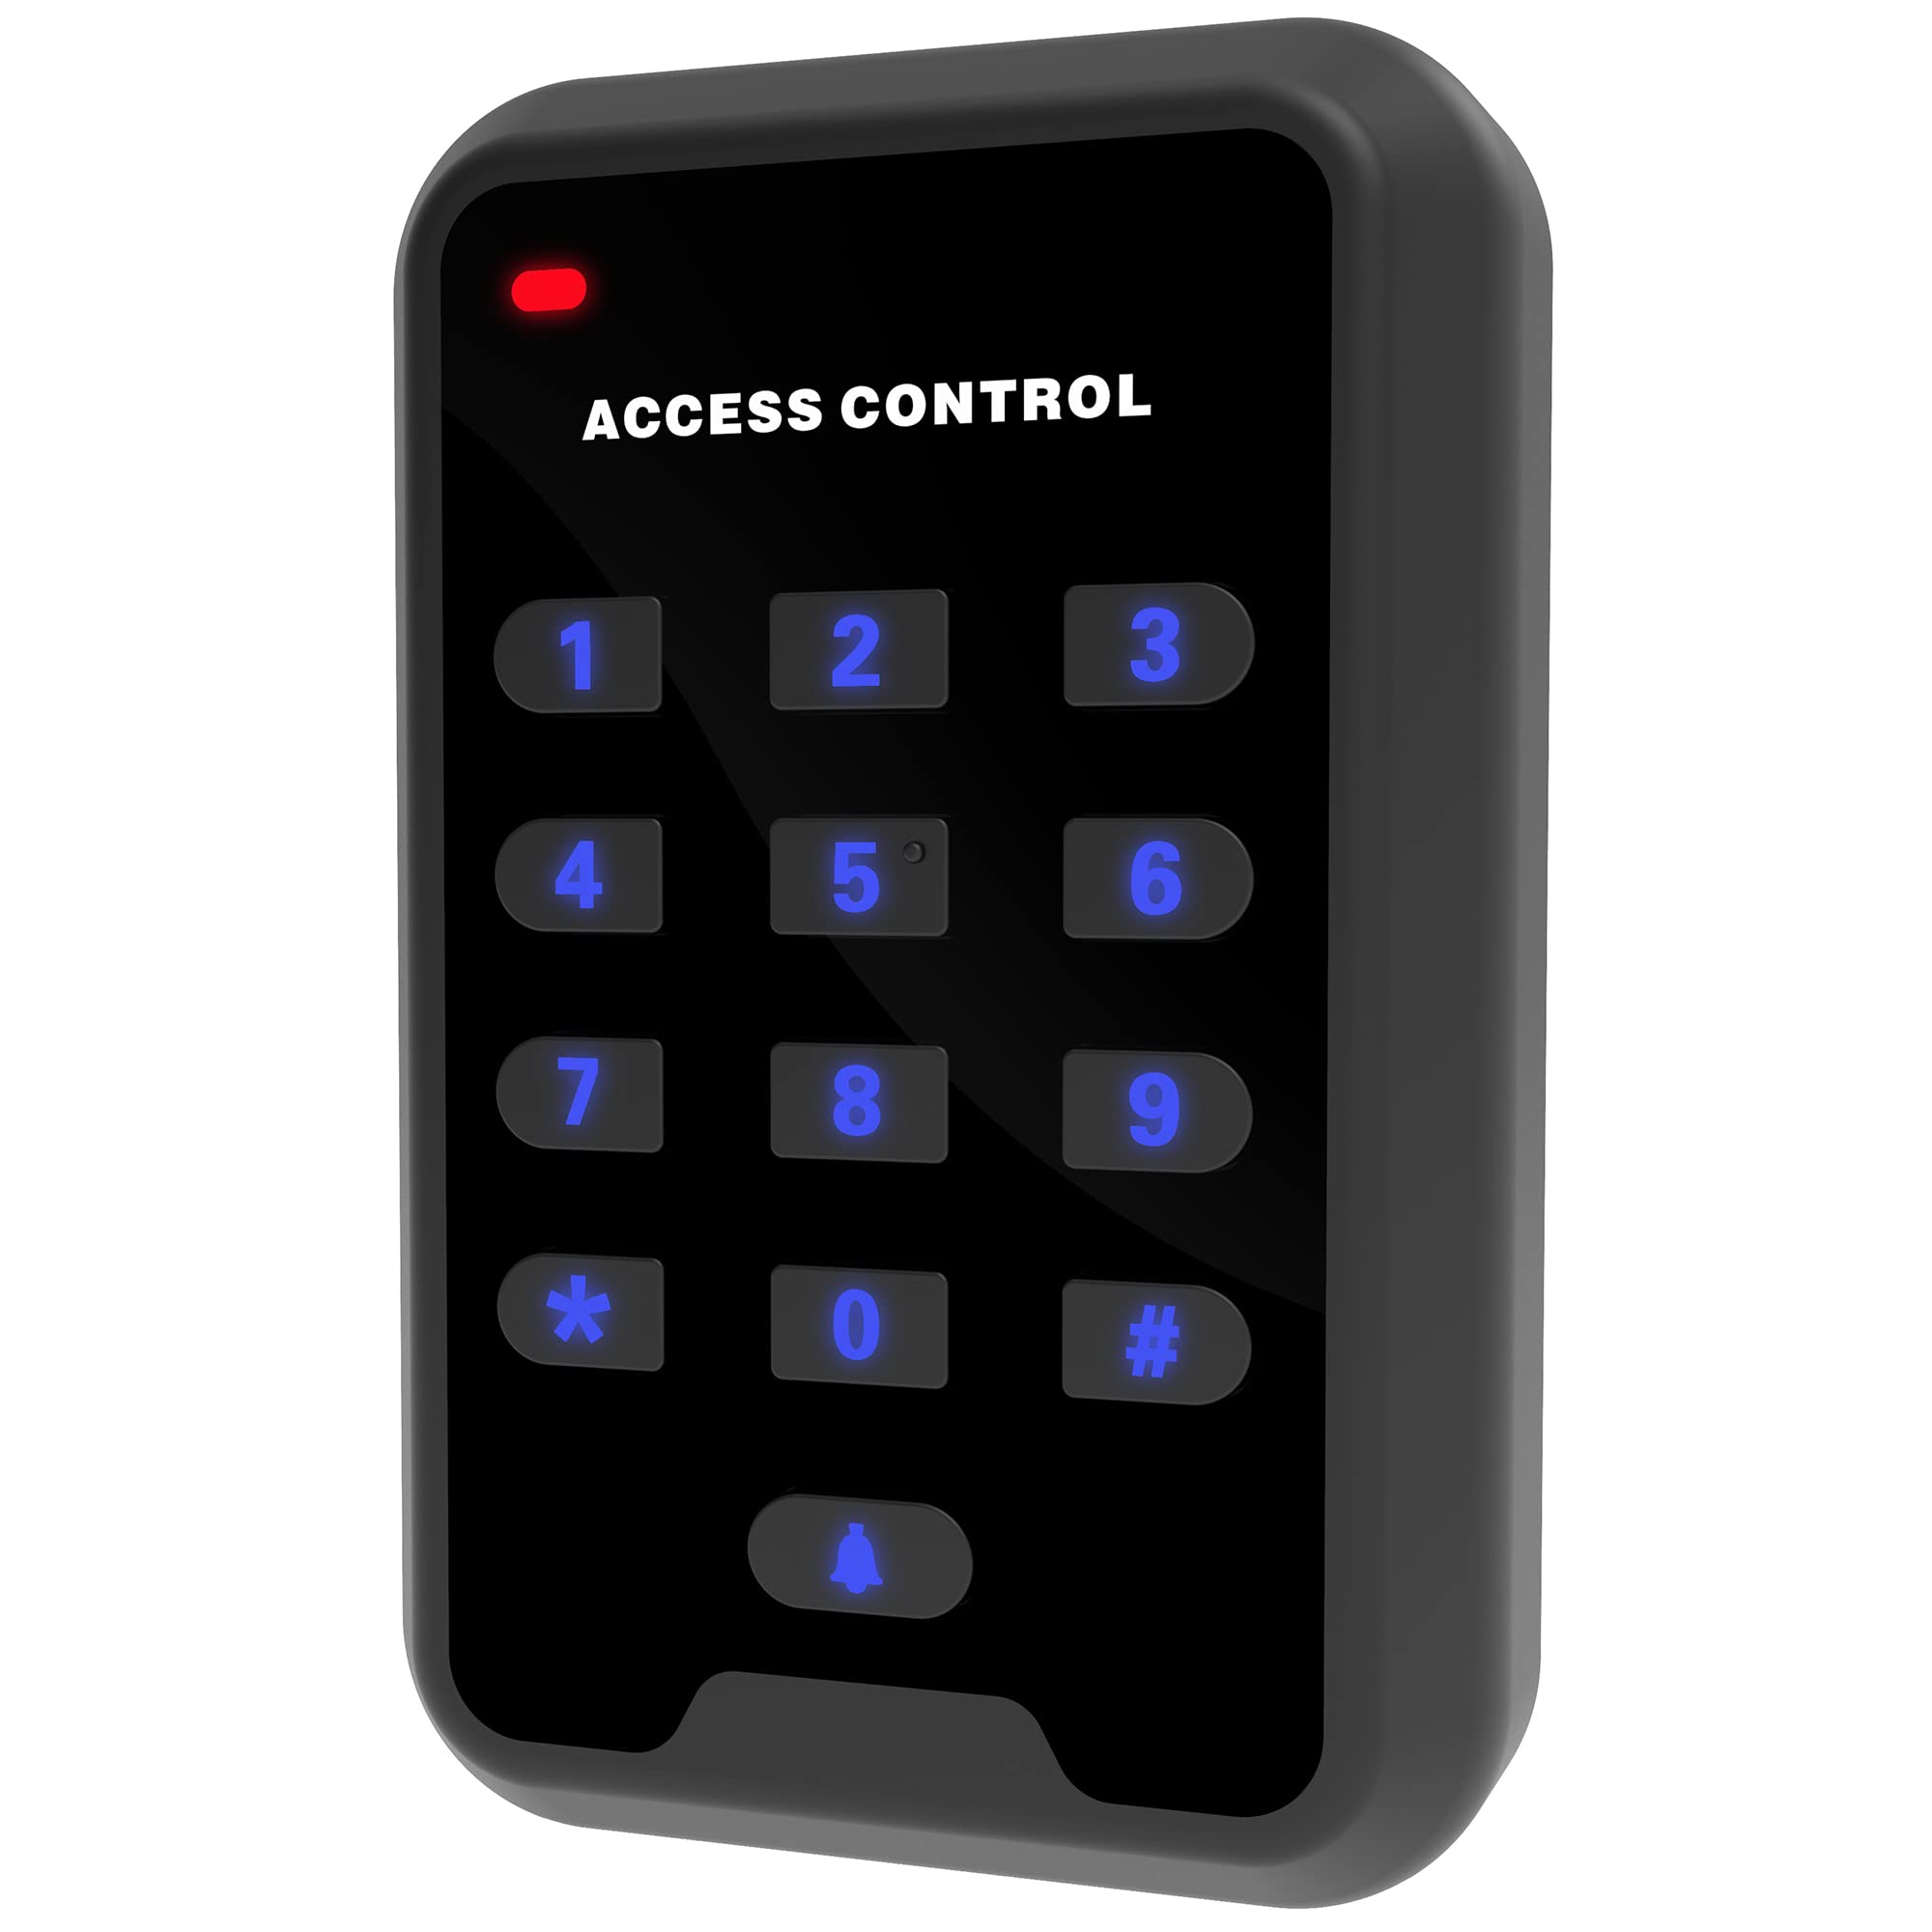 UHPPOTE 125KHz RFID EM ID Keypad Stand-Alone Door Access Control Kit with Strike Lock Remote Control Exit Button